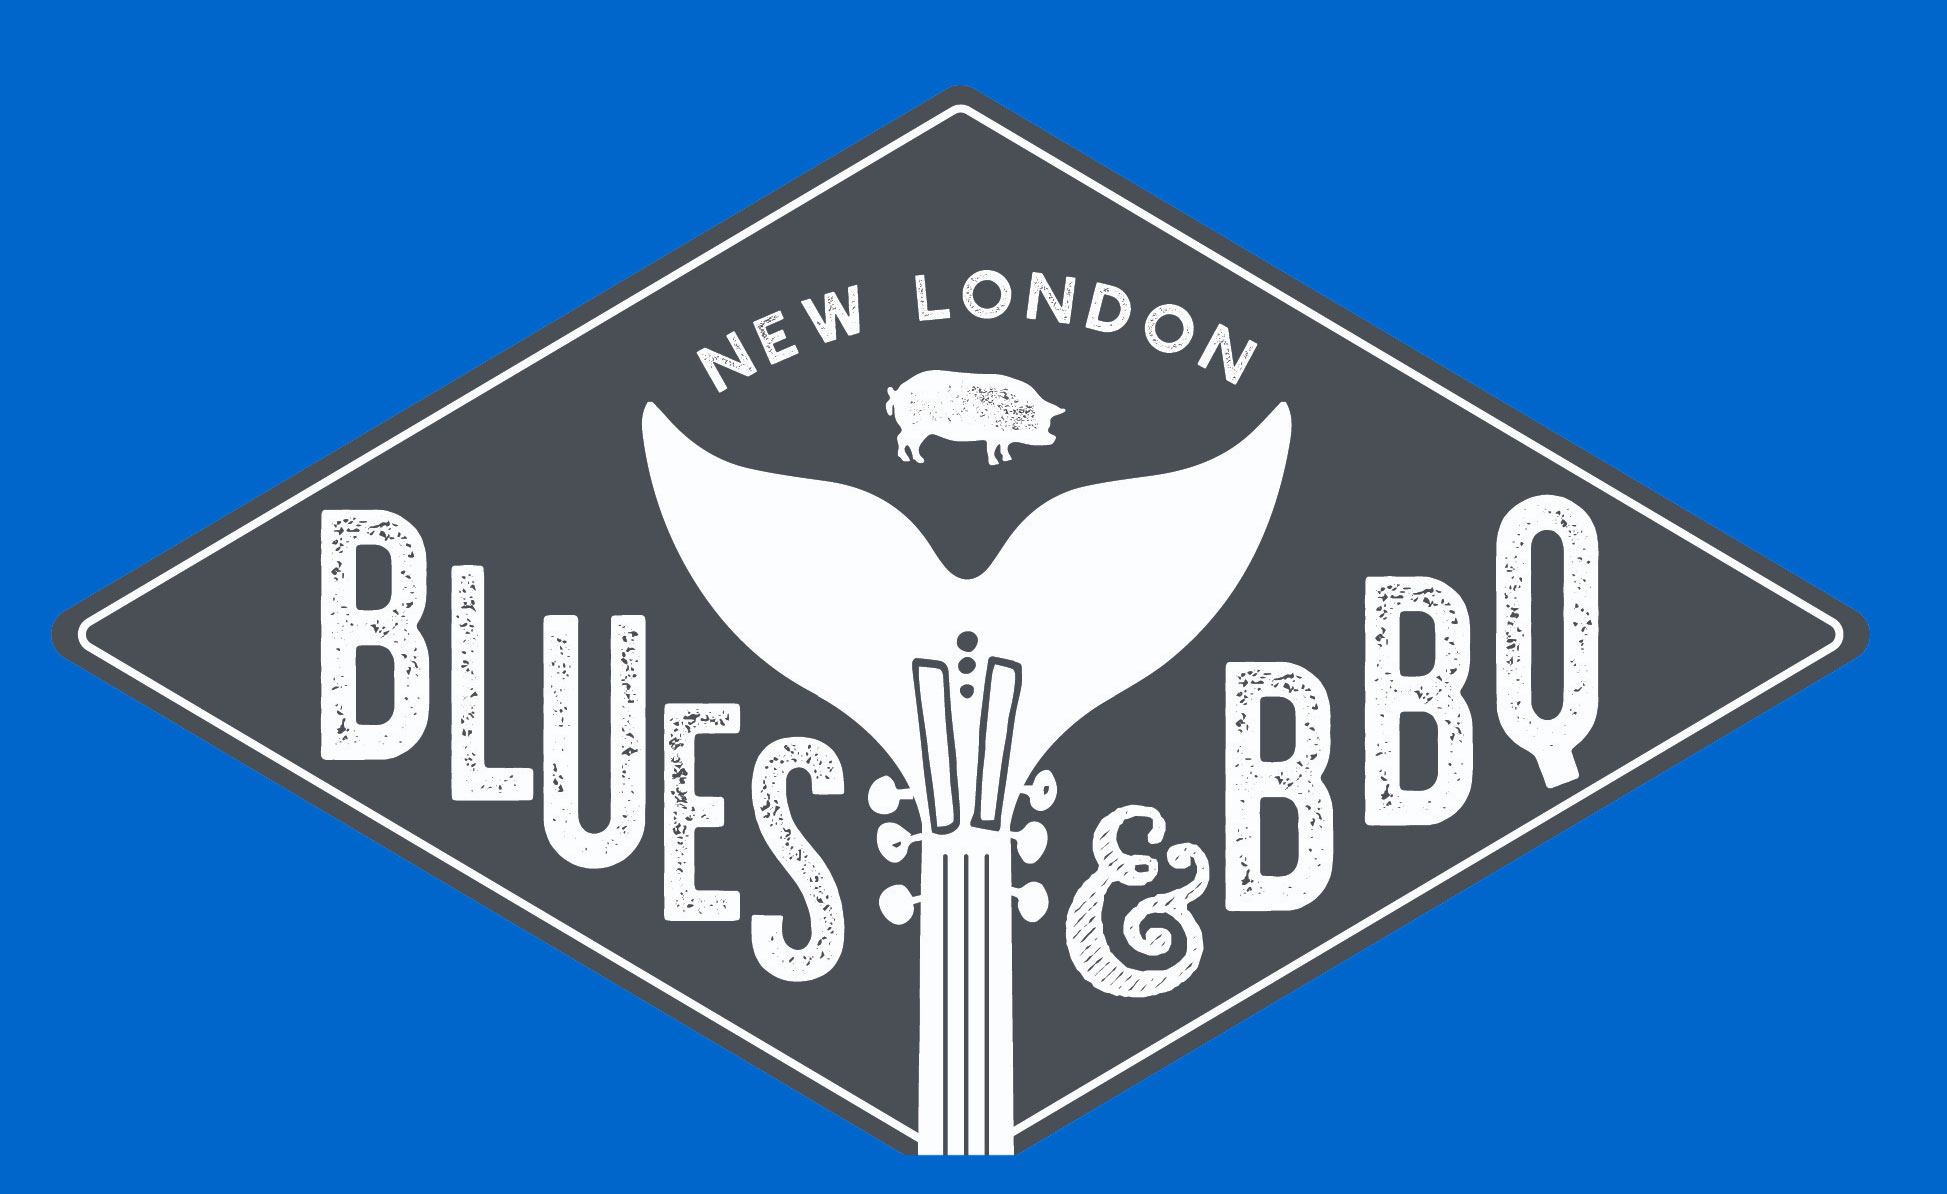 The New London Blues & BBQ Fest will be held on August 10th in Downtown New London.